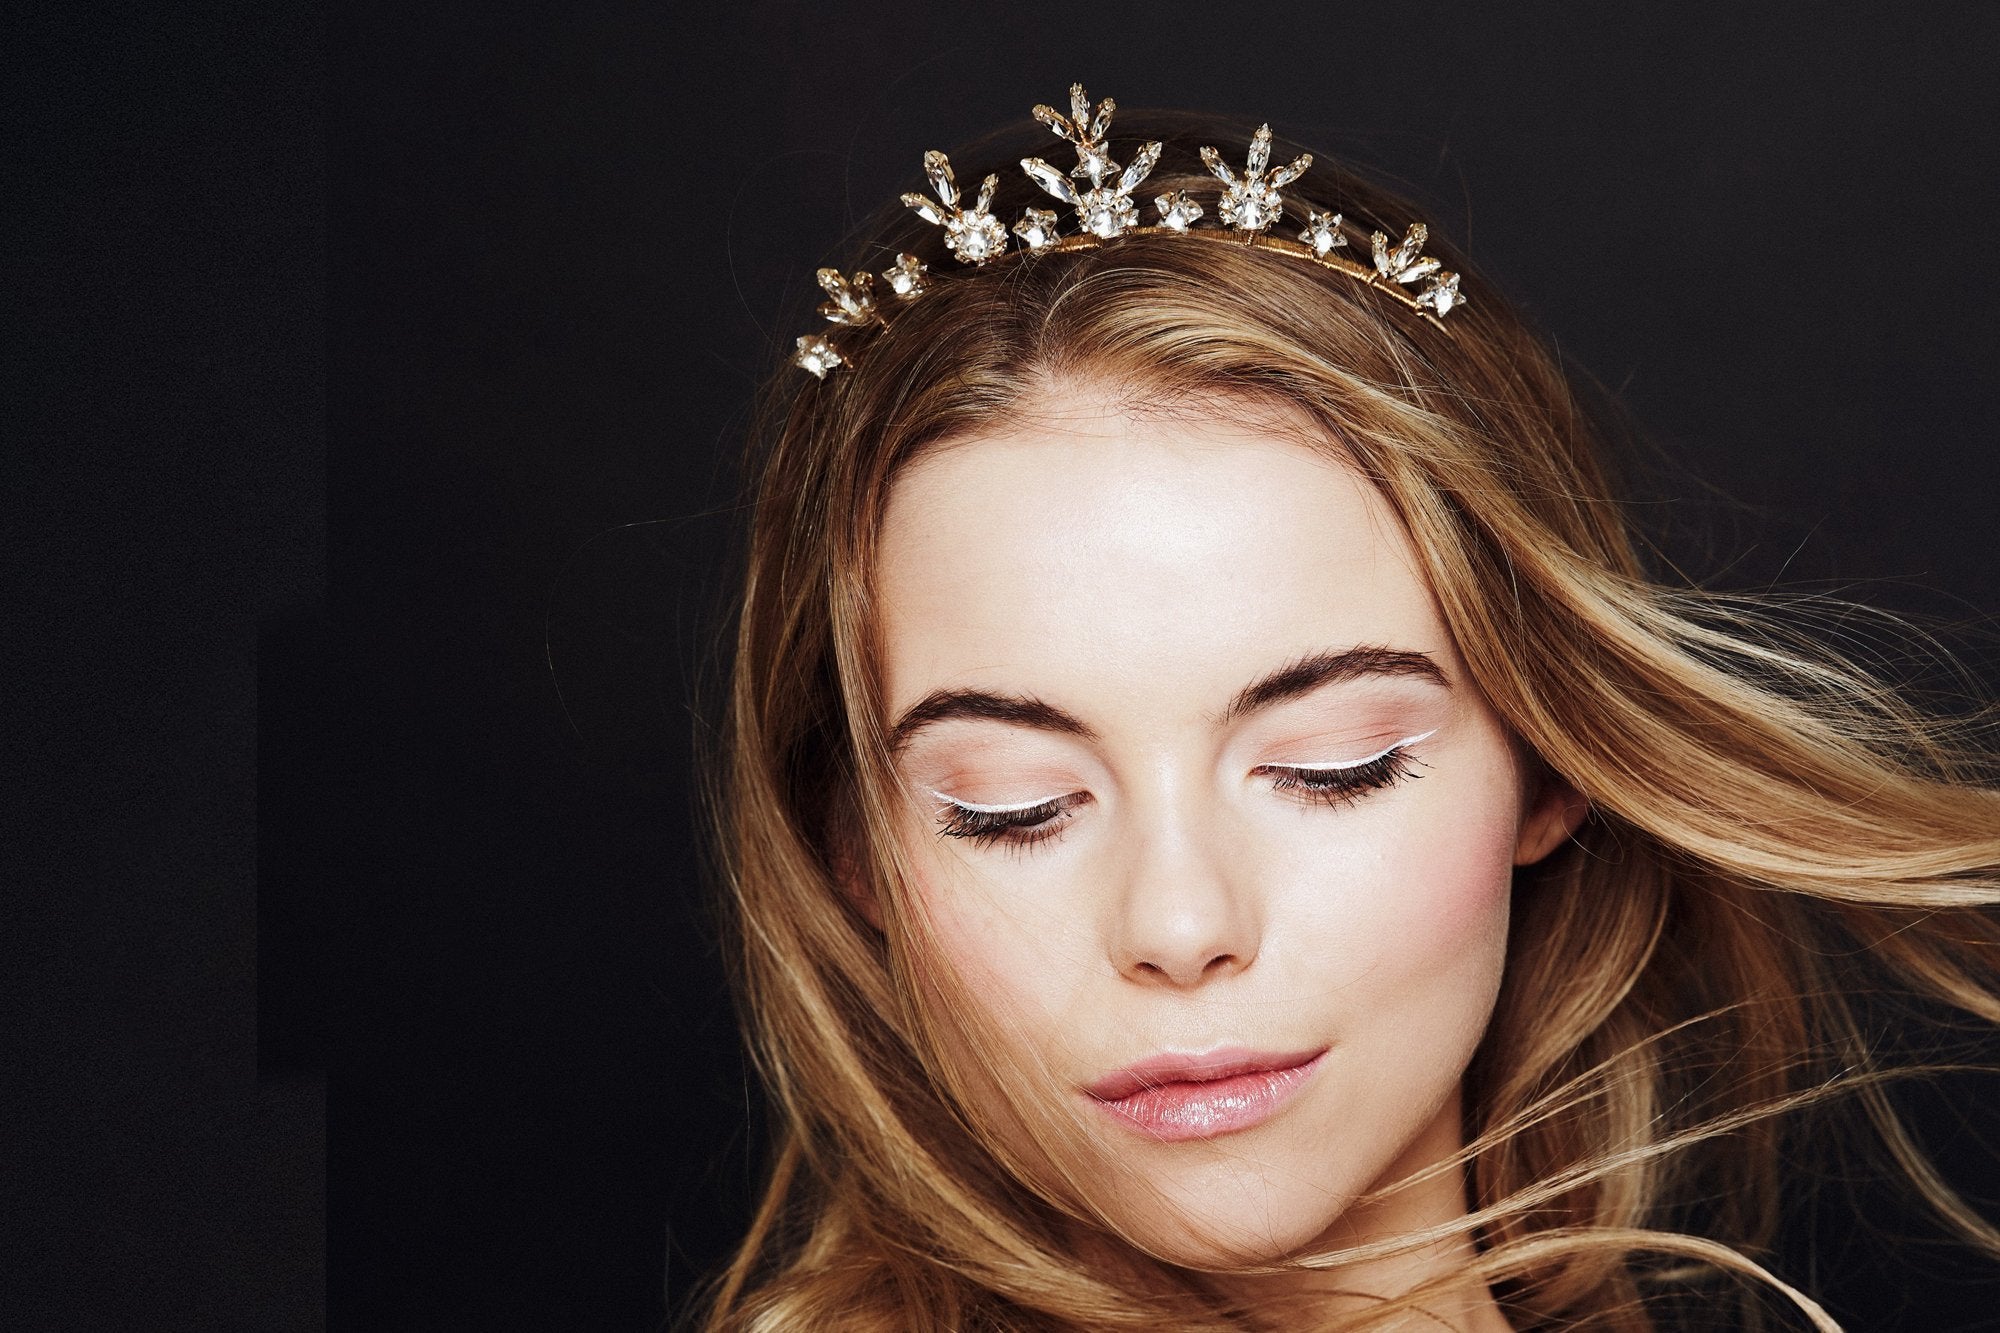 Meet Moonlight - a heavenly new collection of bridal hair accessories and earrings